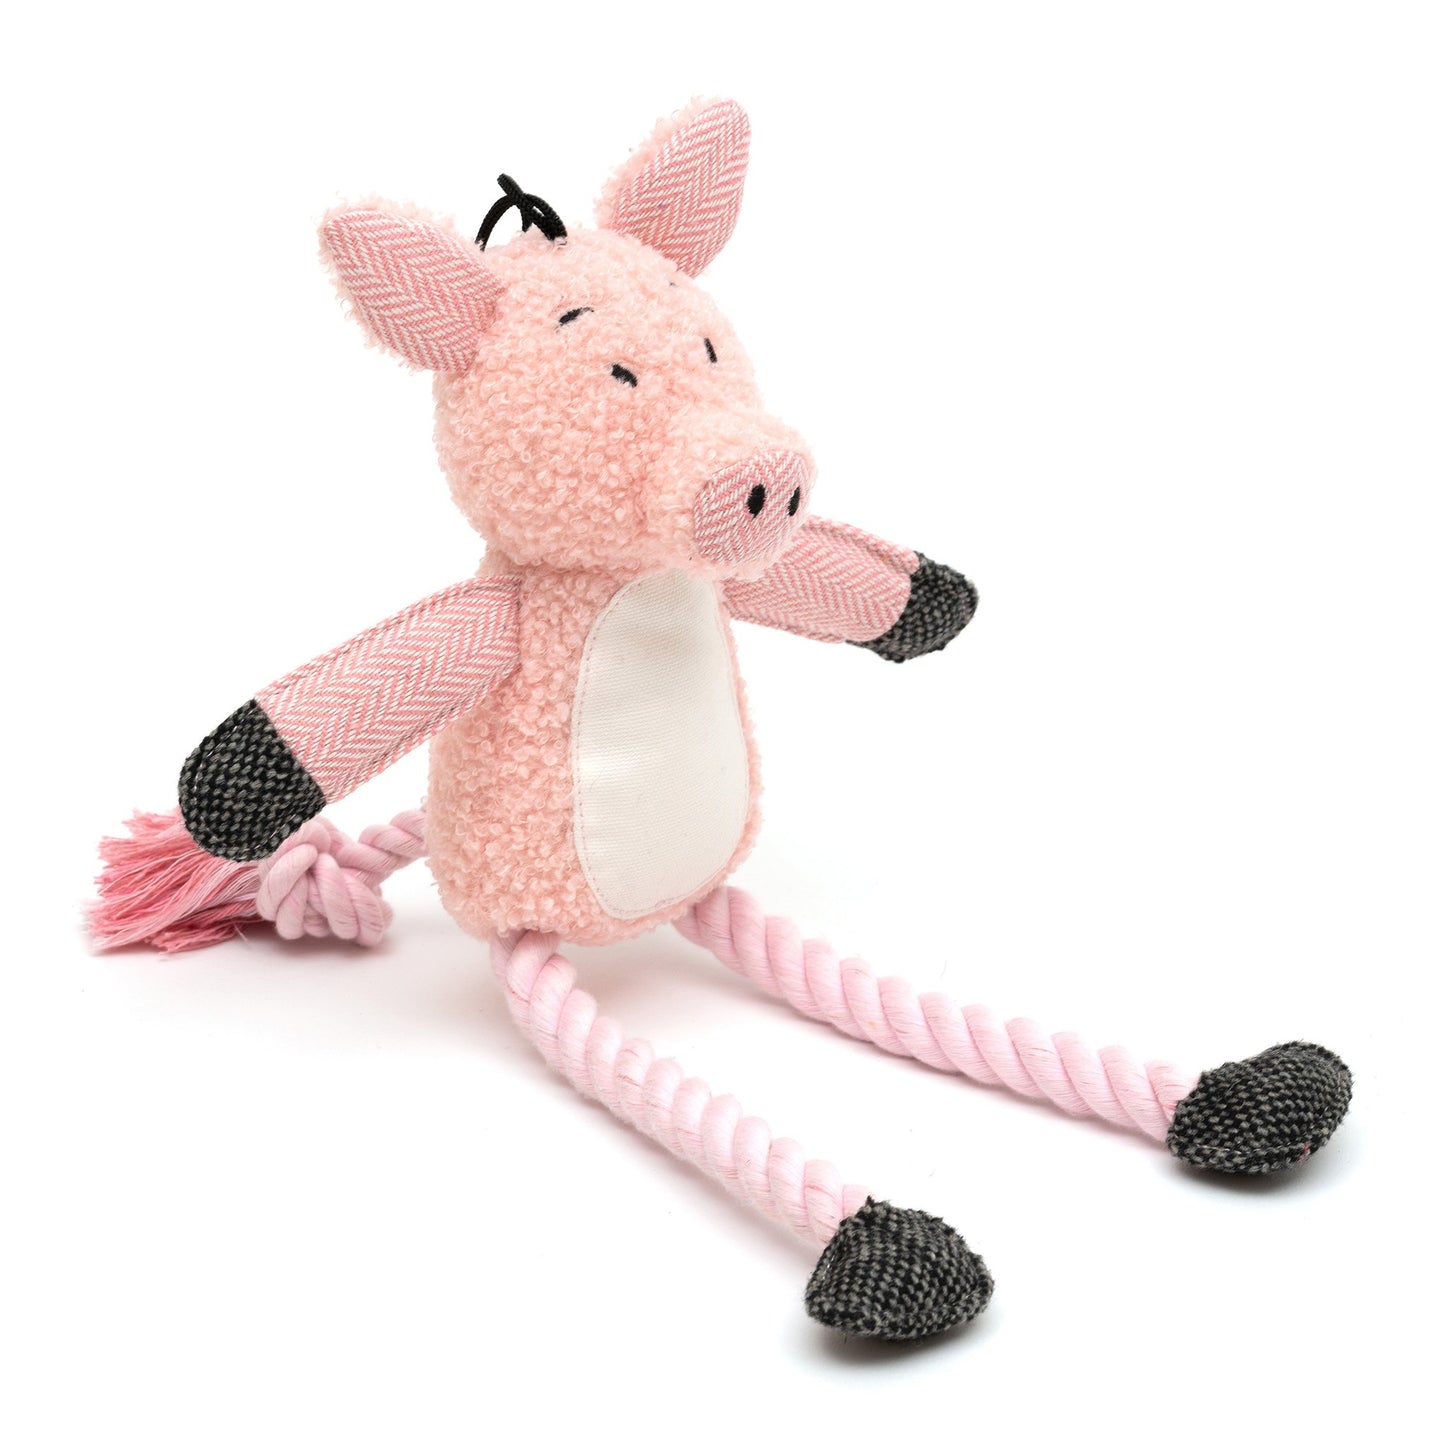 Mutts and Hounds Polly Pig Plush Toy